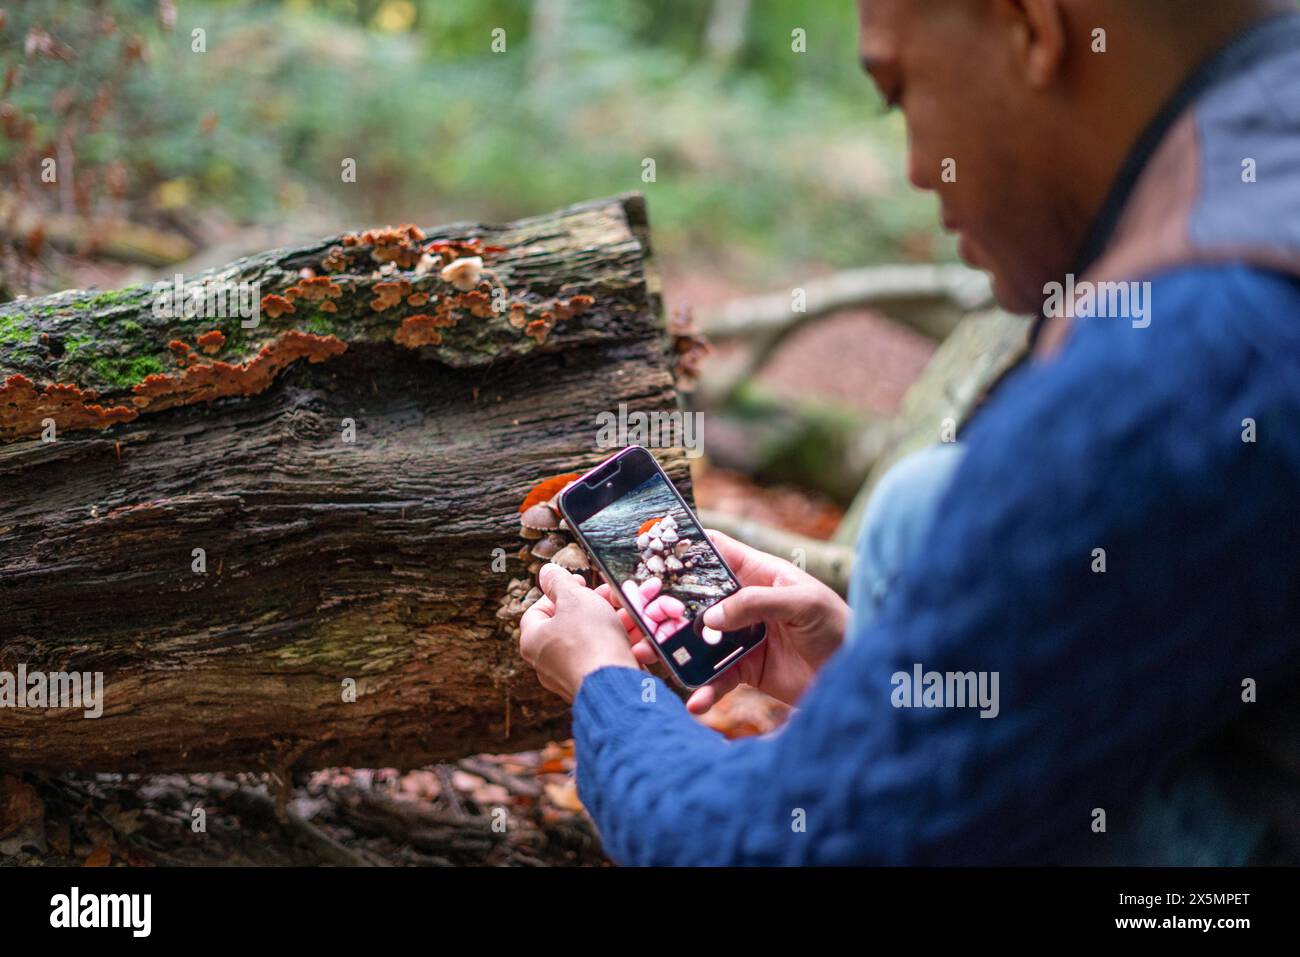 Man taking picture of small mushroom growing on log in forest Stock Photo